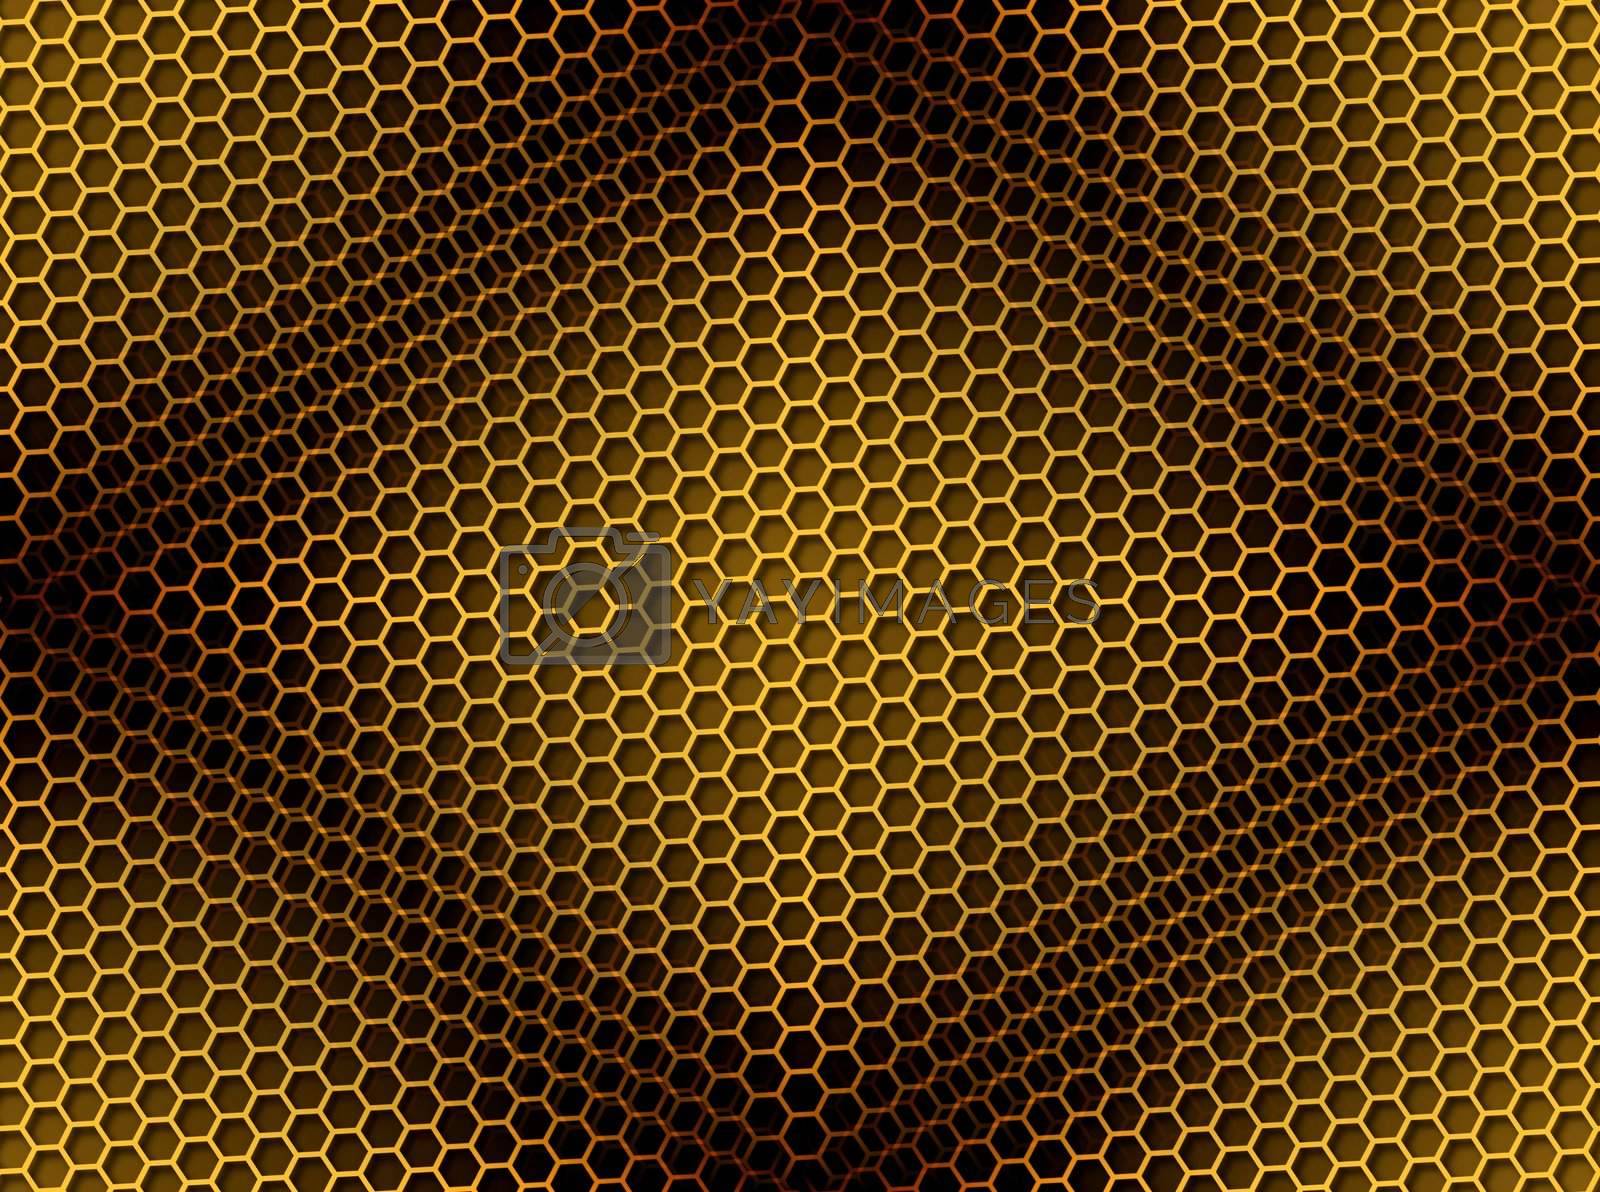 Royalty free image of Honeycomb Background Seamless by hlehnerer